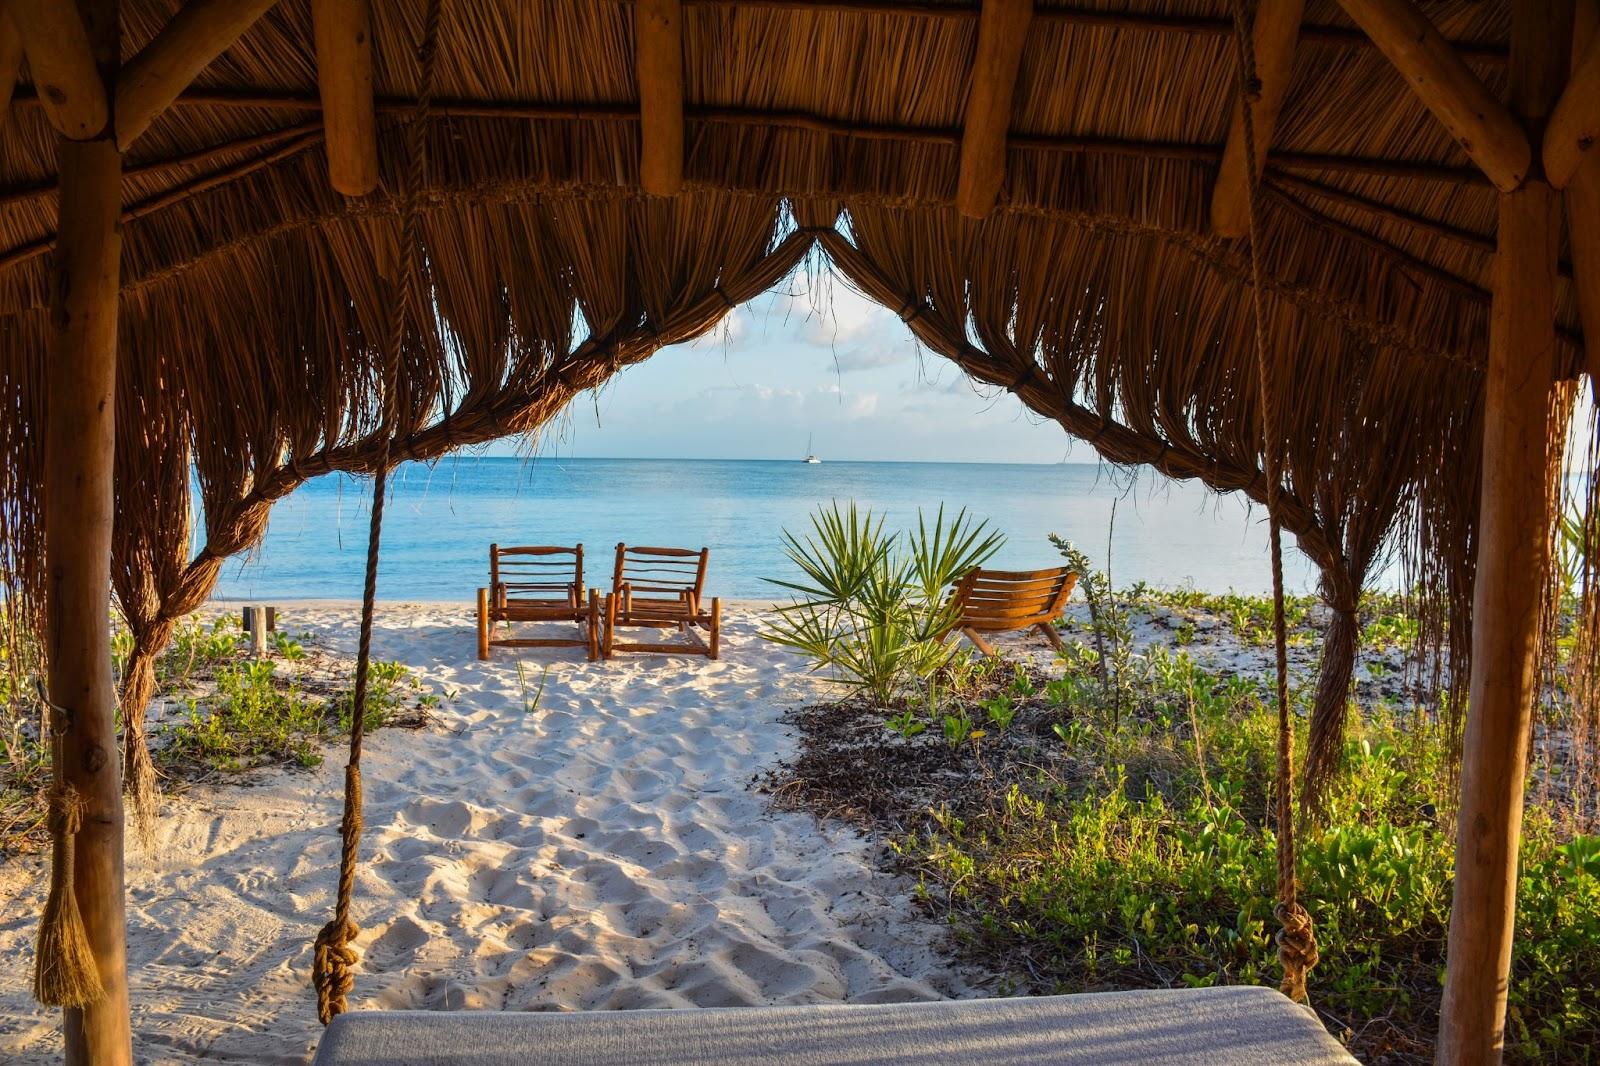 Looking out to sea from an idyllic sun bed on the paradise island of Benguerra Island off Mozambique coast